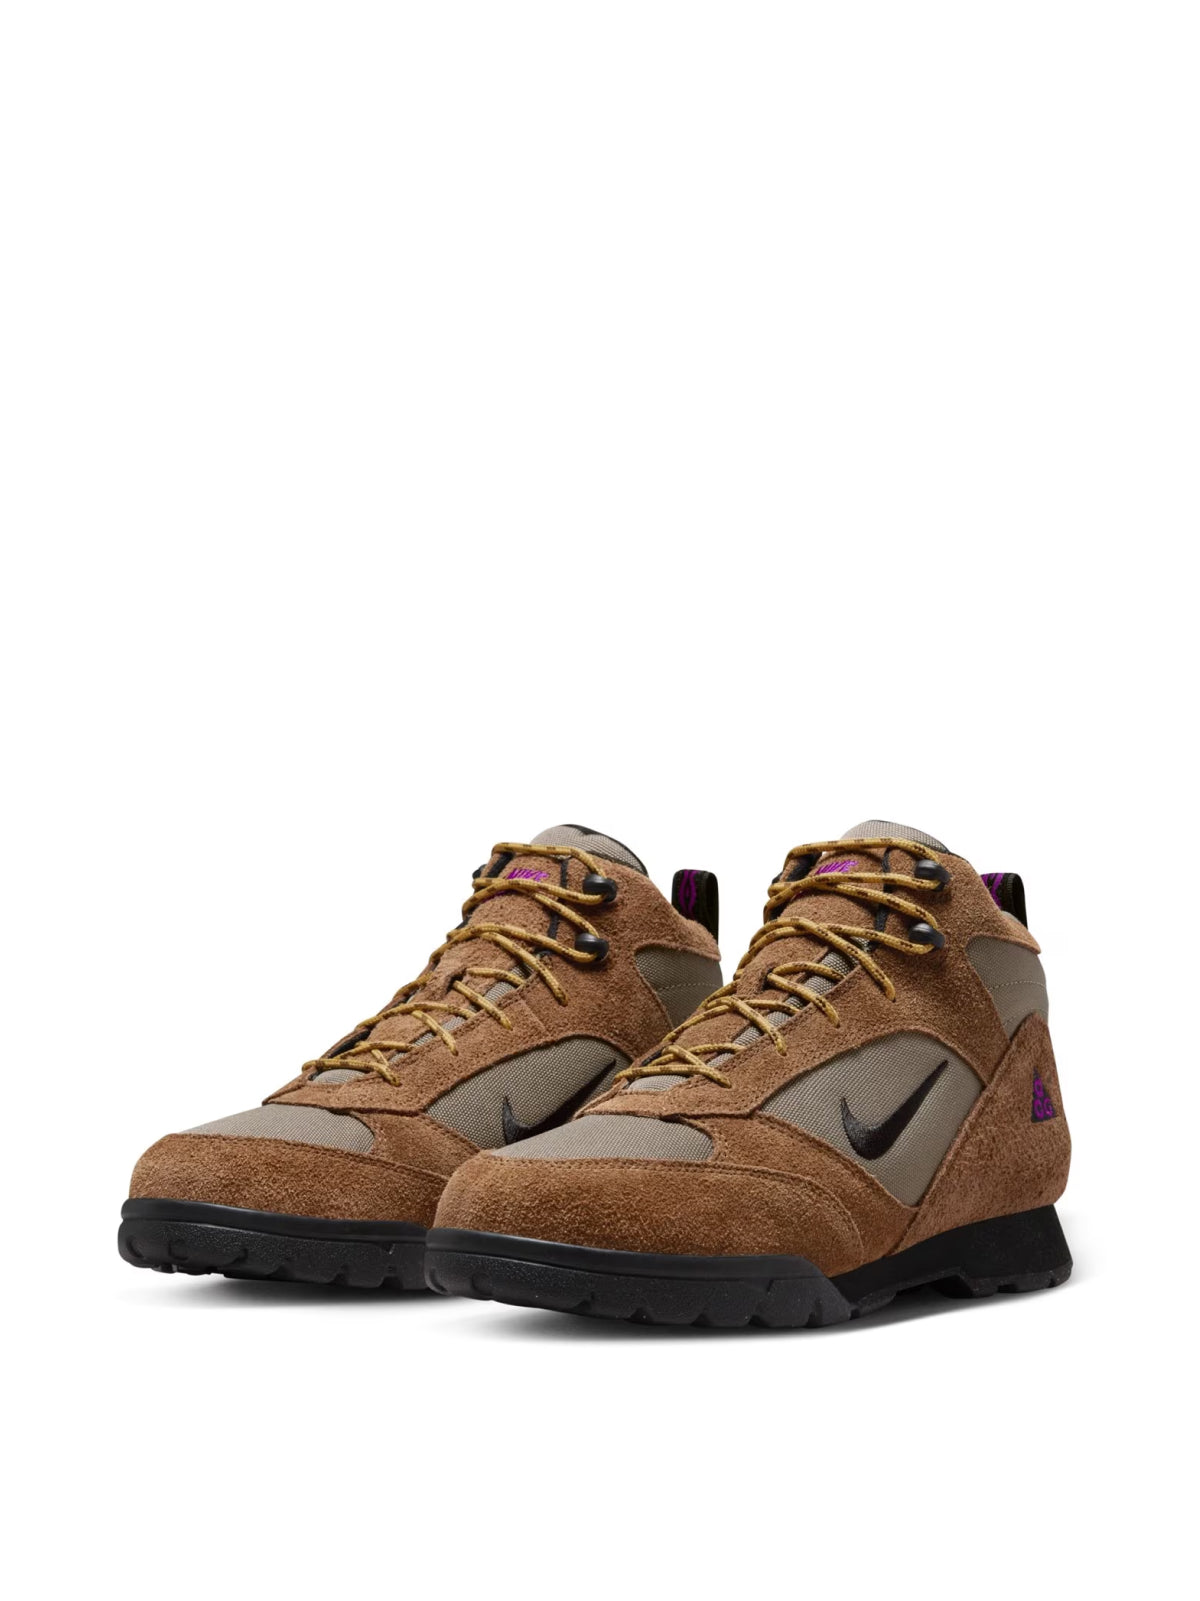 Nike-OUTLET-SALE-ACG Torre Mid WP Sneakers-ARCHIVIST